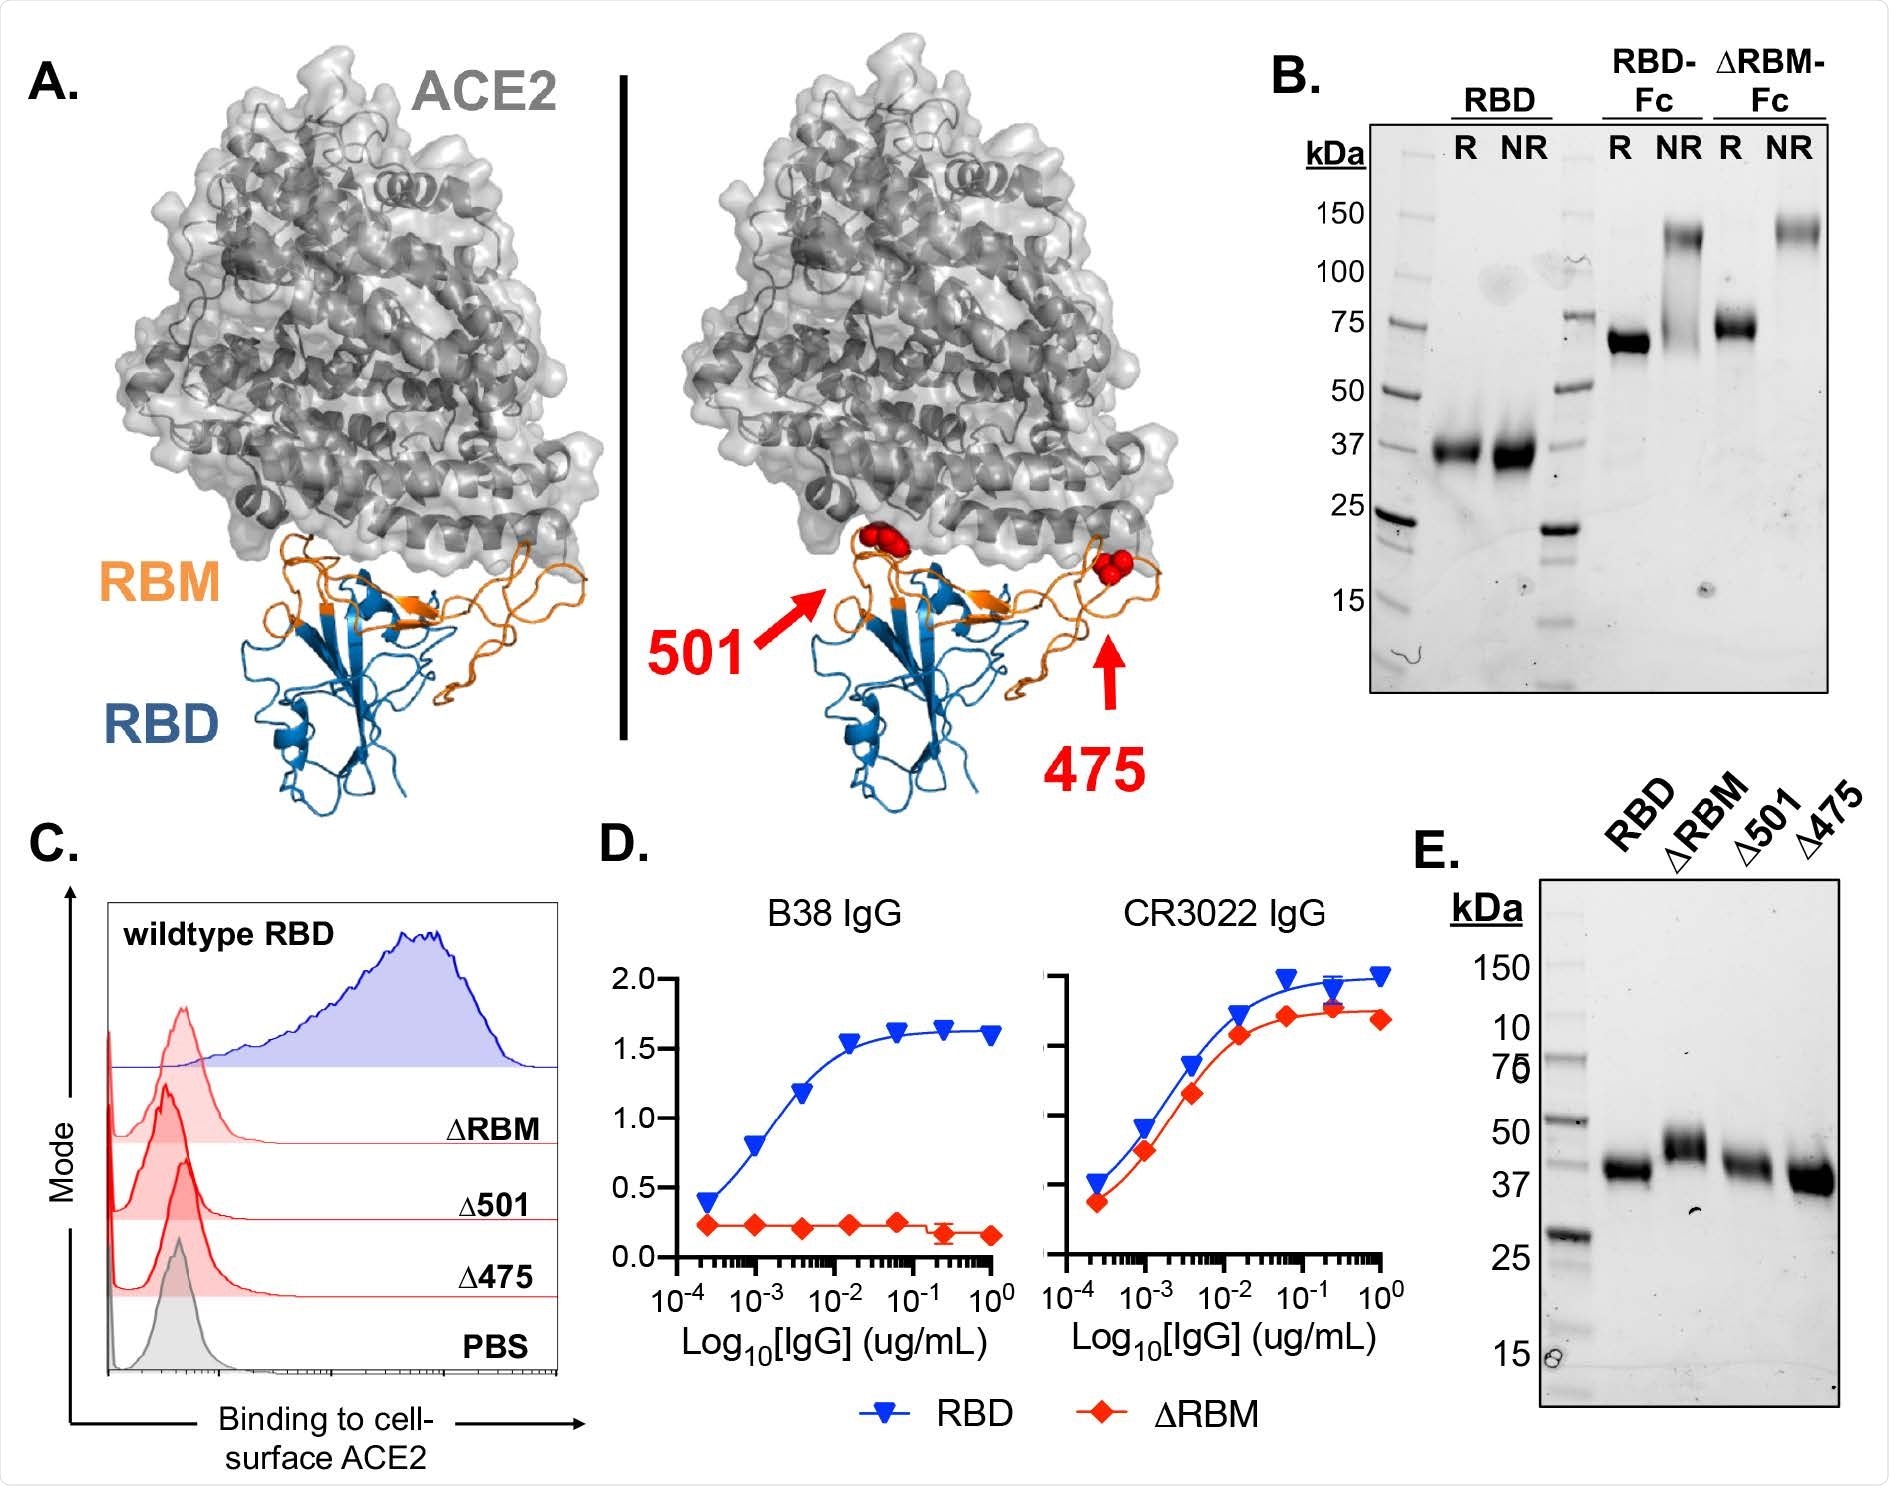 Design and characterization of SARS-CoV-2 antigens. (A) SARS-CoV-2 RBD in complex with viral receptor, ACE2 shown in blue and grey, respectively (PDB 6M0J). Wild-type RBD with, the receptor binding motif (RBM), shown in orange (left panel). Structural model of the ΔRBM probe designed to abrogate binding to ACE2 (right panel). Putative N-linked glycosylation sites engineered onto the RBM are shown in red spheres at amino acid positions 501 and 475. (B) SDS-PAGE gel under reducing (R) and non-reducing (NR) conditions for monomeric RBD, RBD-Fc and ΔRBM-Fc. (C) Wildtype RBD, ΔRBM and single glycan variant binding to ACE2-expressing 293T cells by flow cytometry. Wild-type RBD binding shown in blue, glycan variant binding shown in red. Streptavidin-PE was used to detect the relative intensity of antigen binding to cell-surface ACE2. A PBS control (gray) indicates secondary-only staining. (D) Control antibody ELISA binding to RBD and ΔRBM antigens. RBM-specific antibody, B38 (left). Non- RBM-specific control antibody, CR3022 (right). (E) ΔRBM and Δ501 and Δ475 variants analyzed by SDS-PAGE gel under reducing conditions; wildtype RBD is shown for comparison.